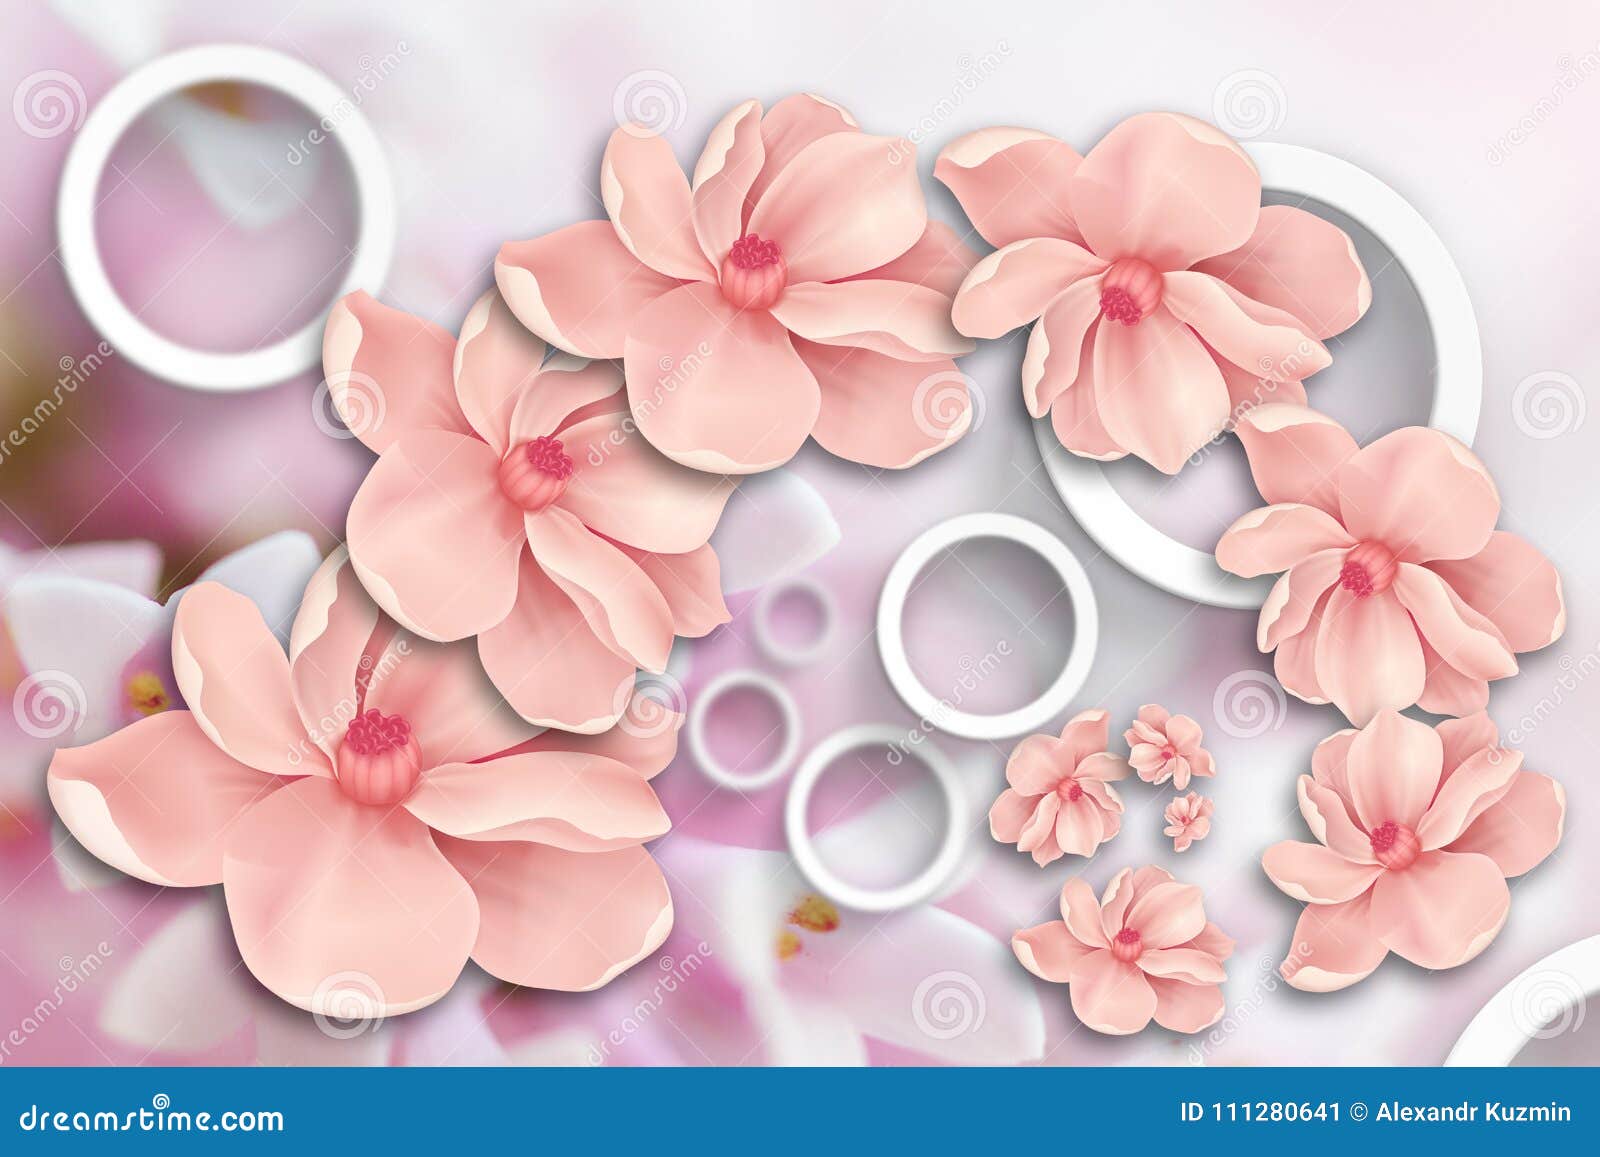 floating flowers. stereoscopic photo wallpaper for interior. 3d rendering.